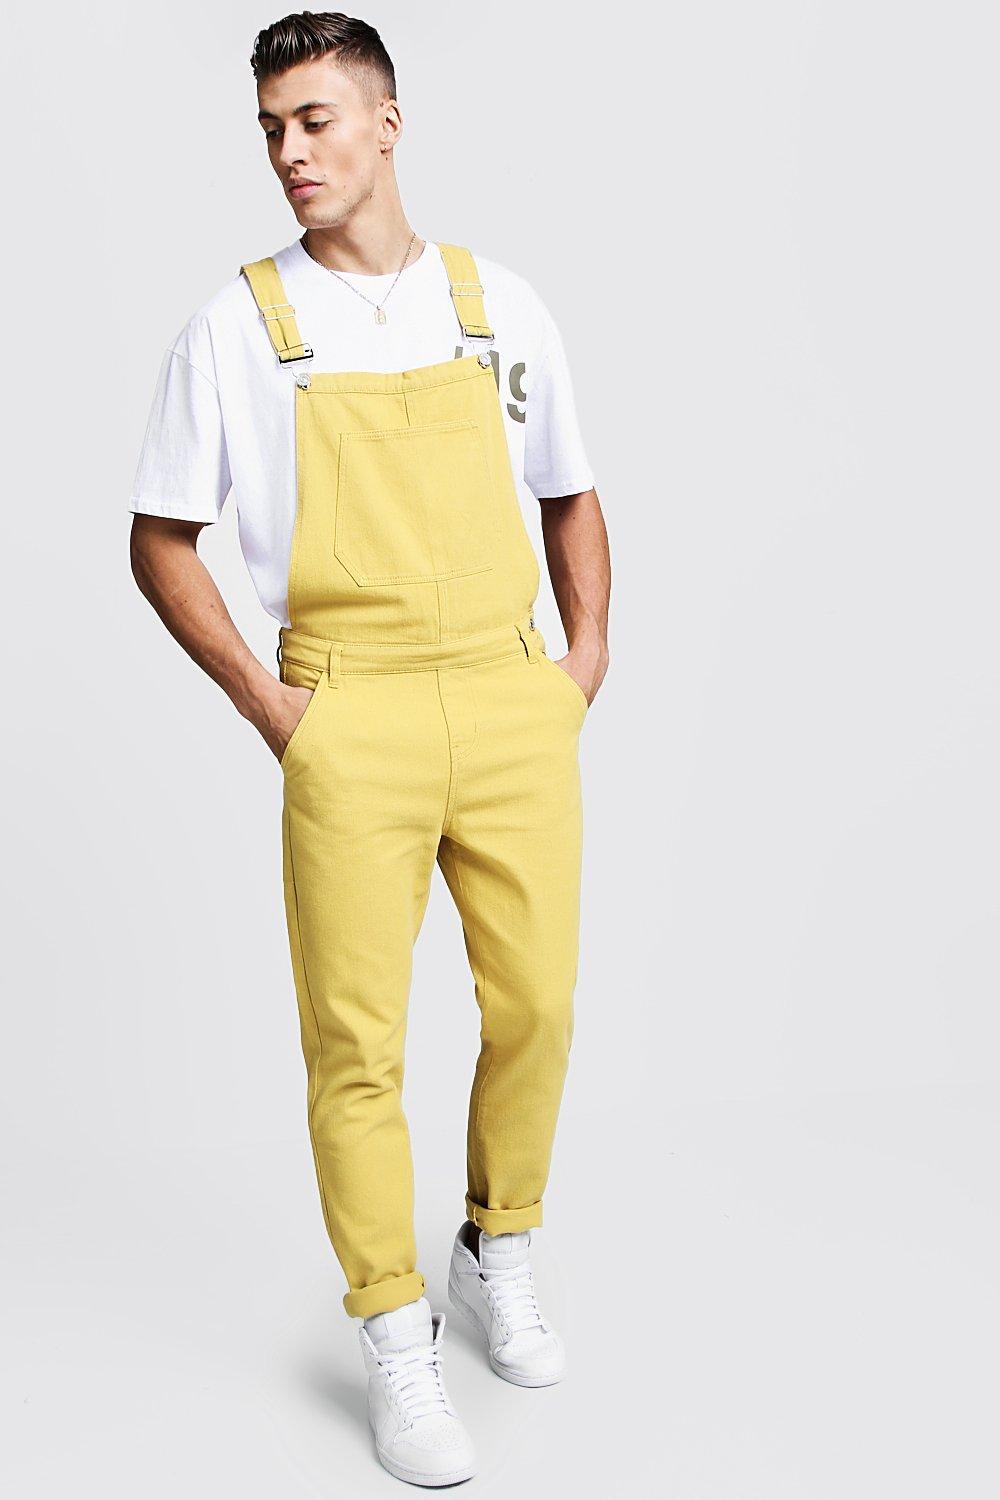 Color: D, Size: 2XL - Men's Casual Tethered Elastic Sports Baggy Pants